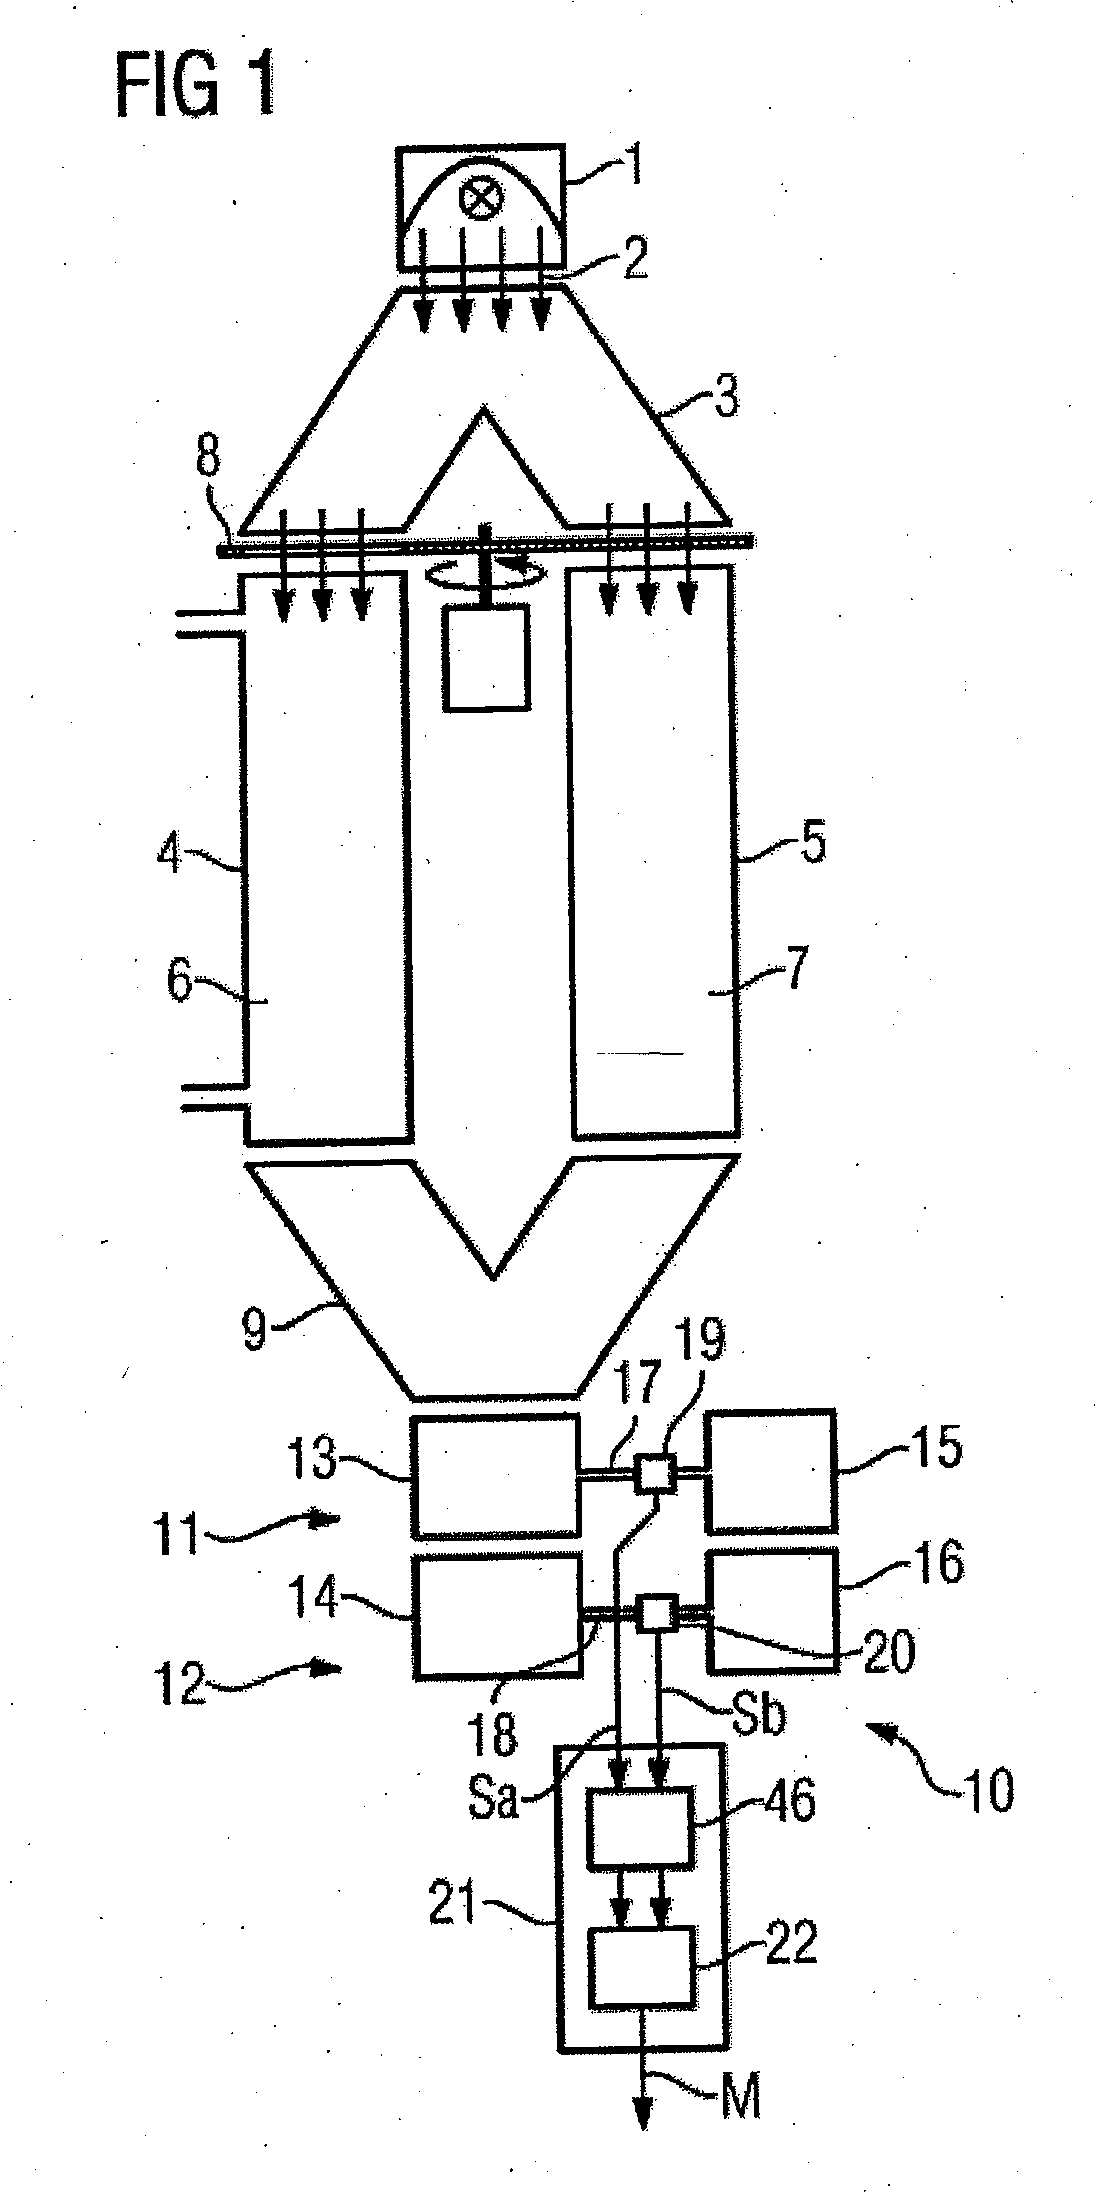 NDIR-two Beam Gas Analyser And Method For Determining The Concentration Of A Measuring Gas Component in a Gas Mixture by means of Said type of Gas Analyser